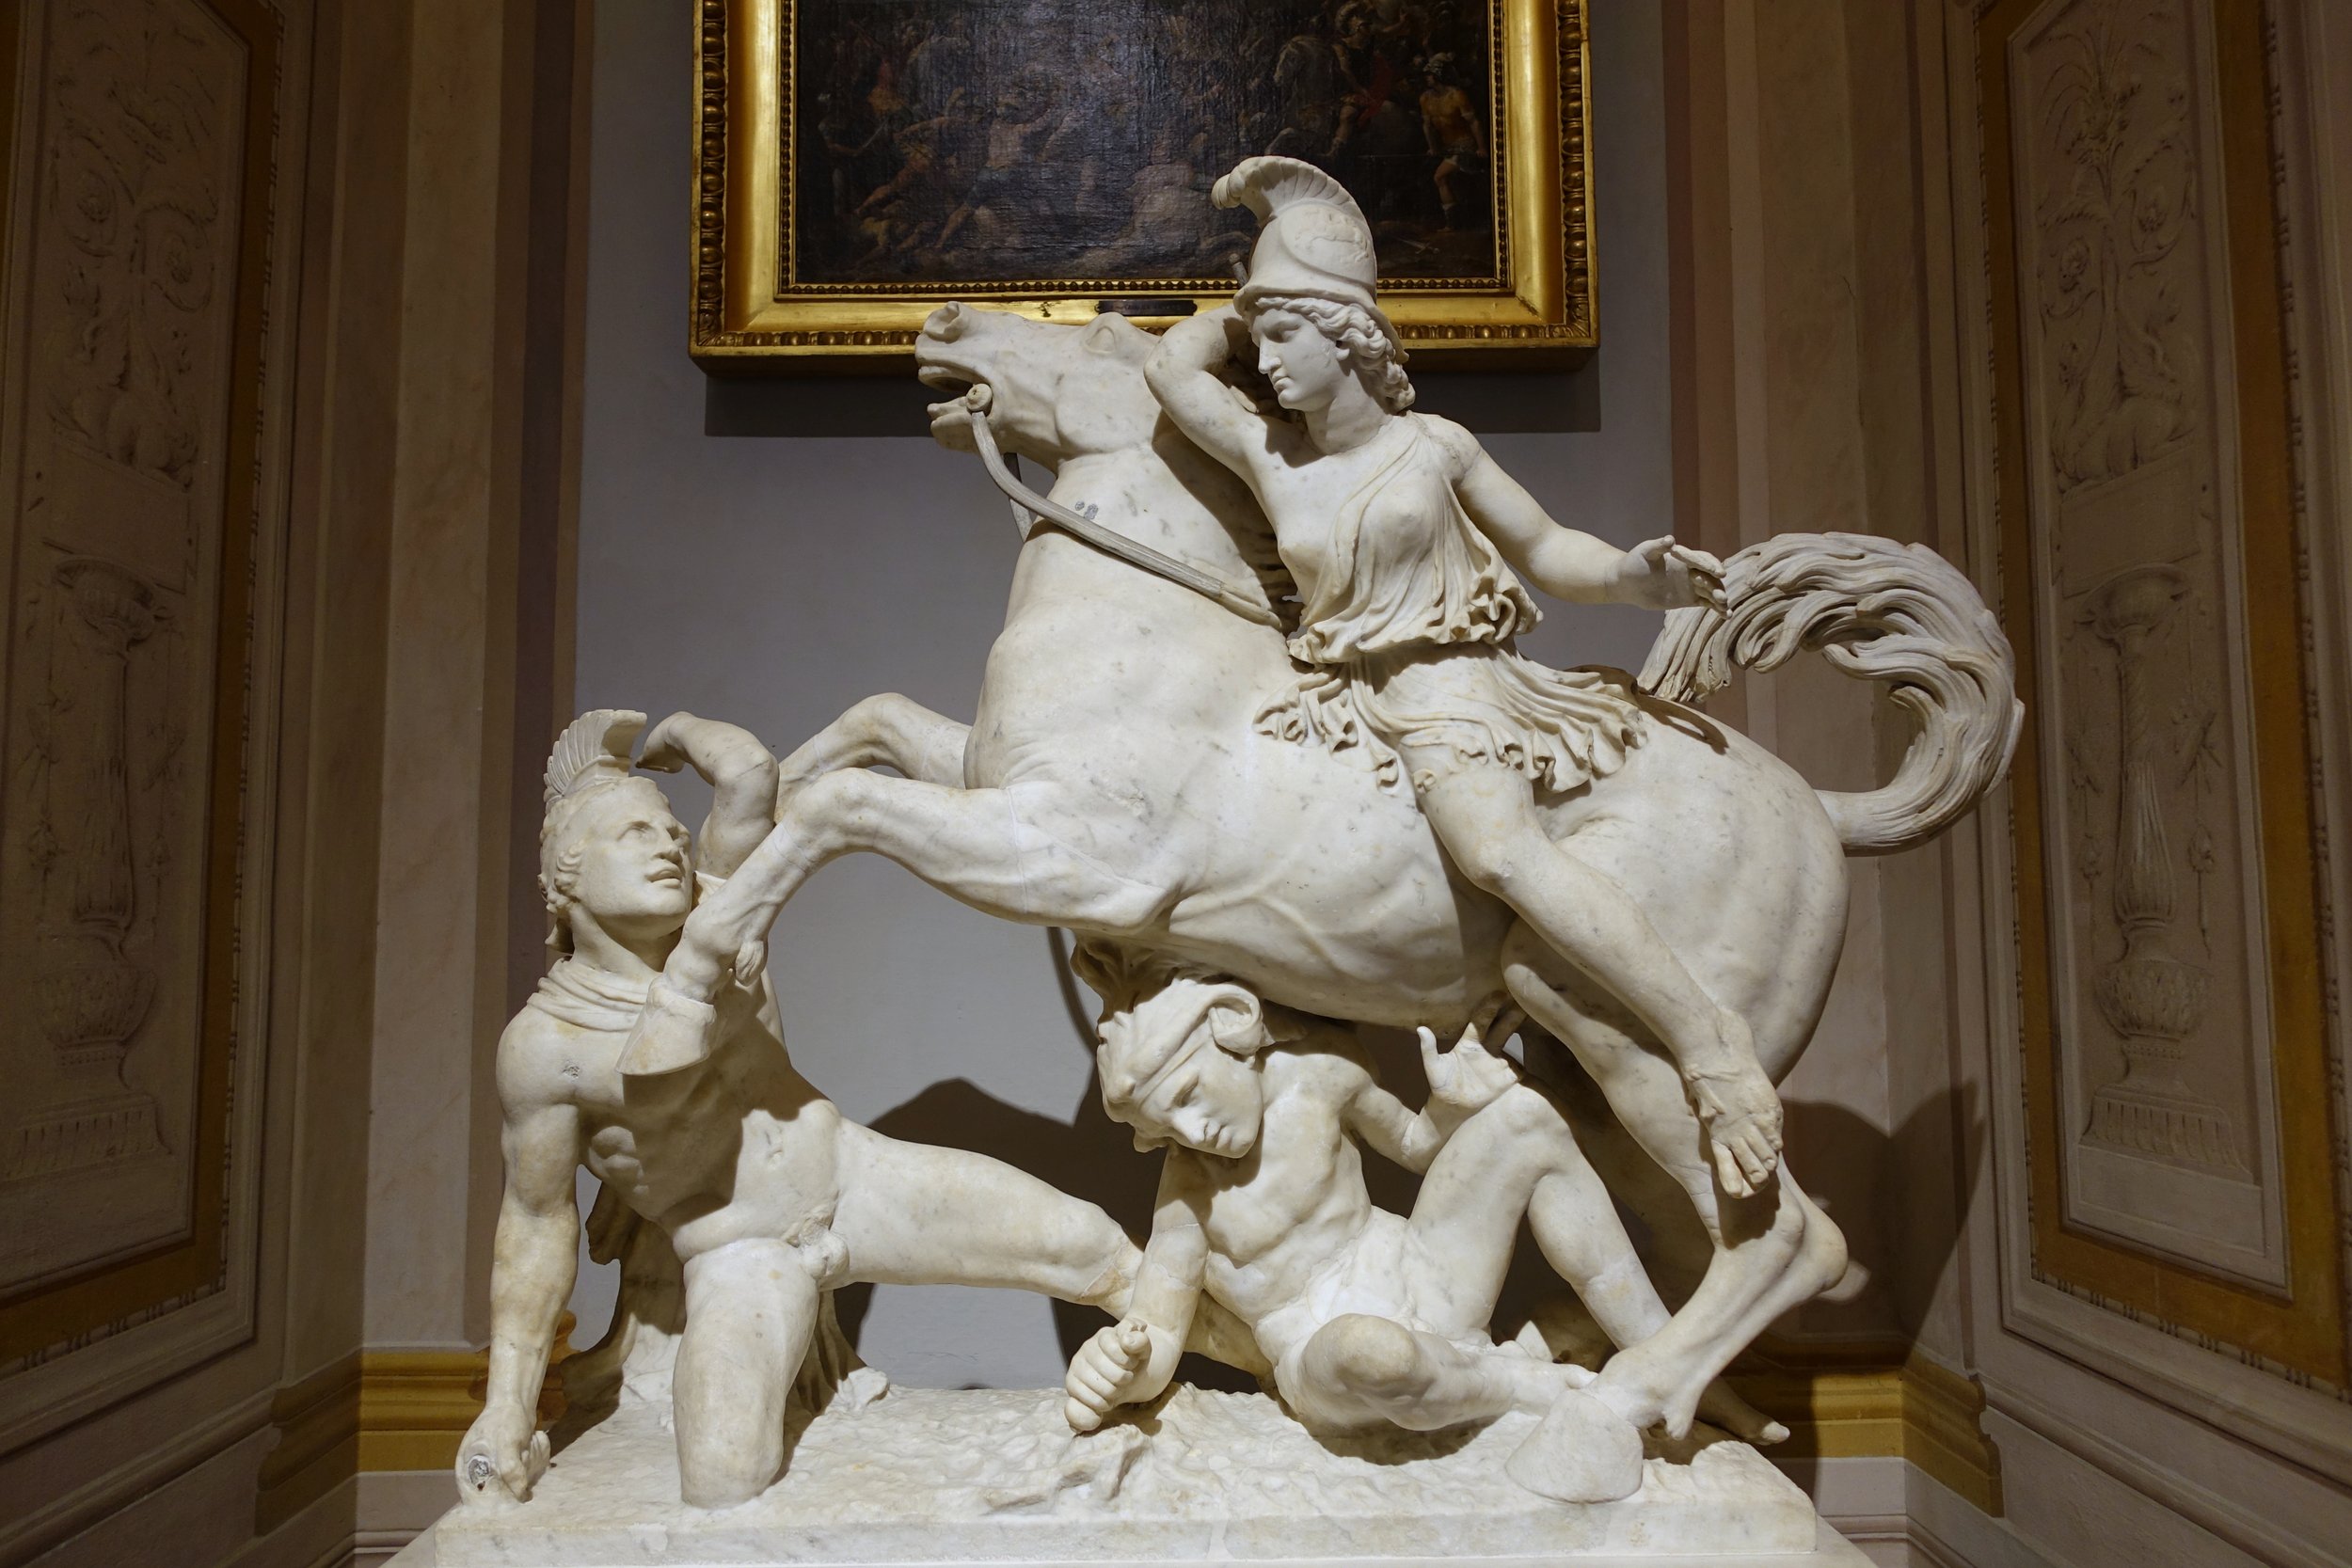 Amazon_with_barbarian_and_Greek,_Roman,_detail,_c._160_AD,_marble_-_Galleria_Borghese_-_Rome,_Italy_-_DSC04659.jpg